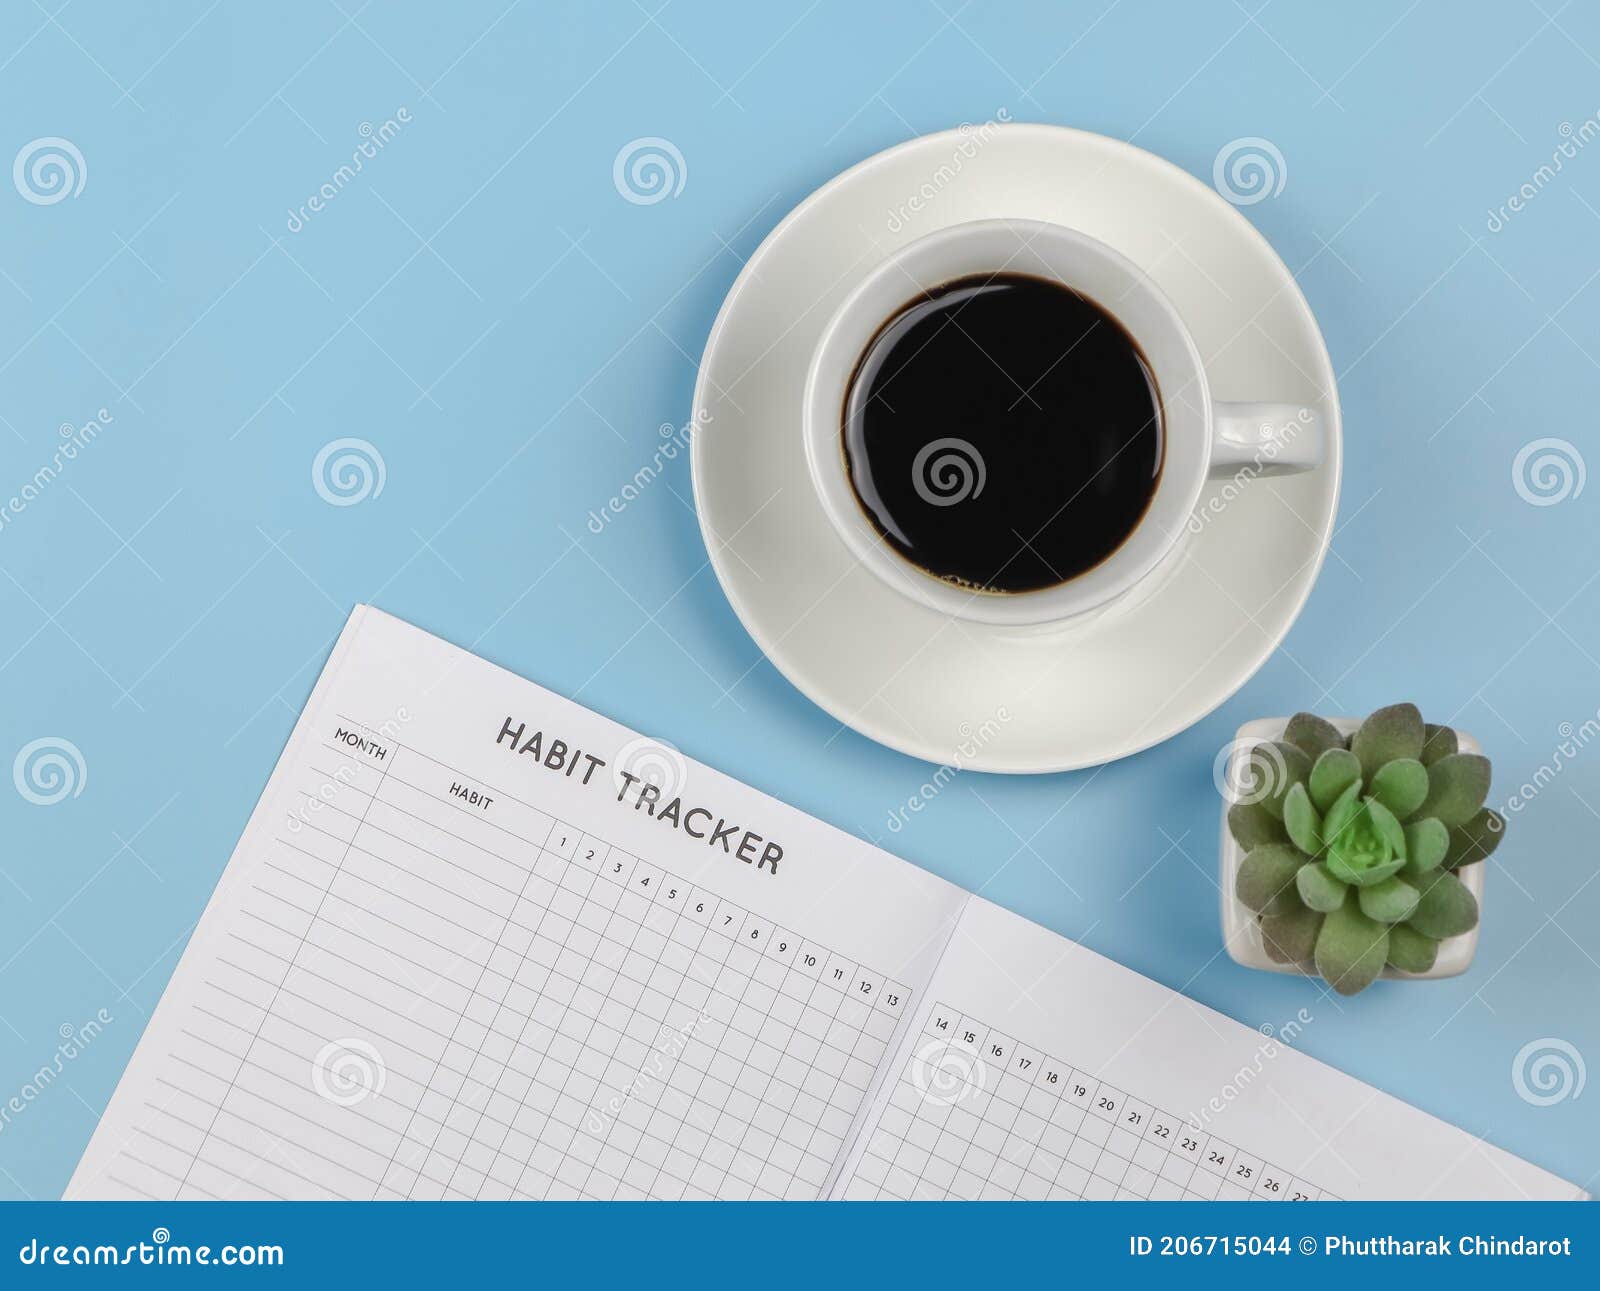 flat lay of habit tracker book with pen,  cup of black coffee and succulent plant pot on blue background with copy space